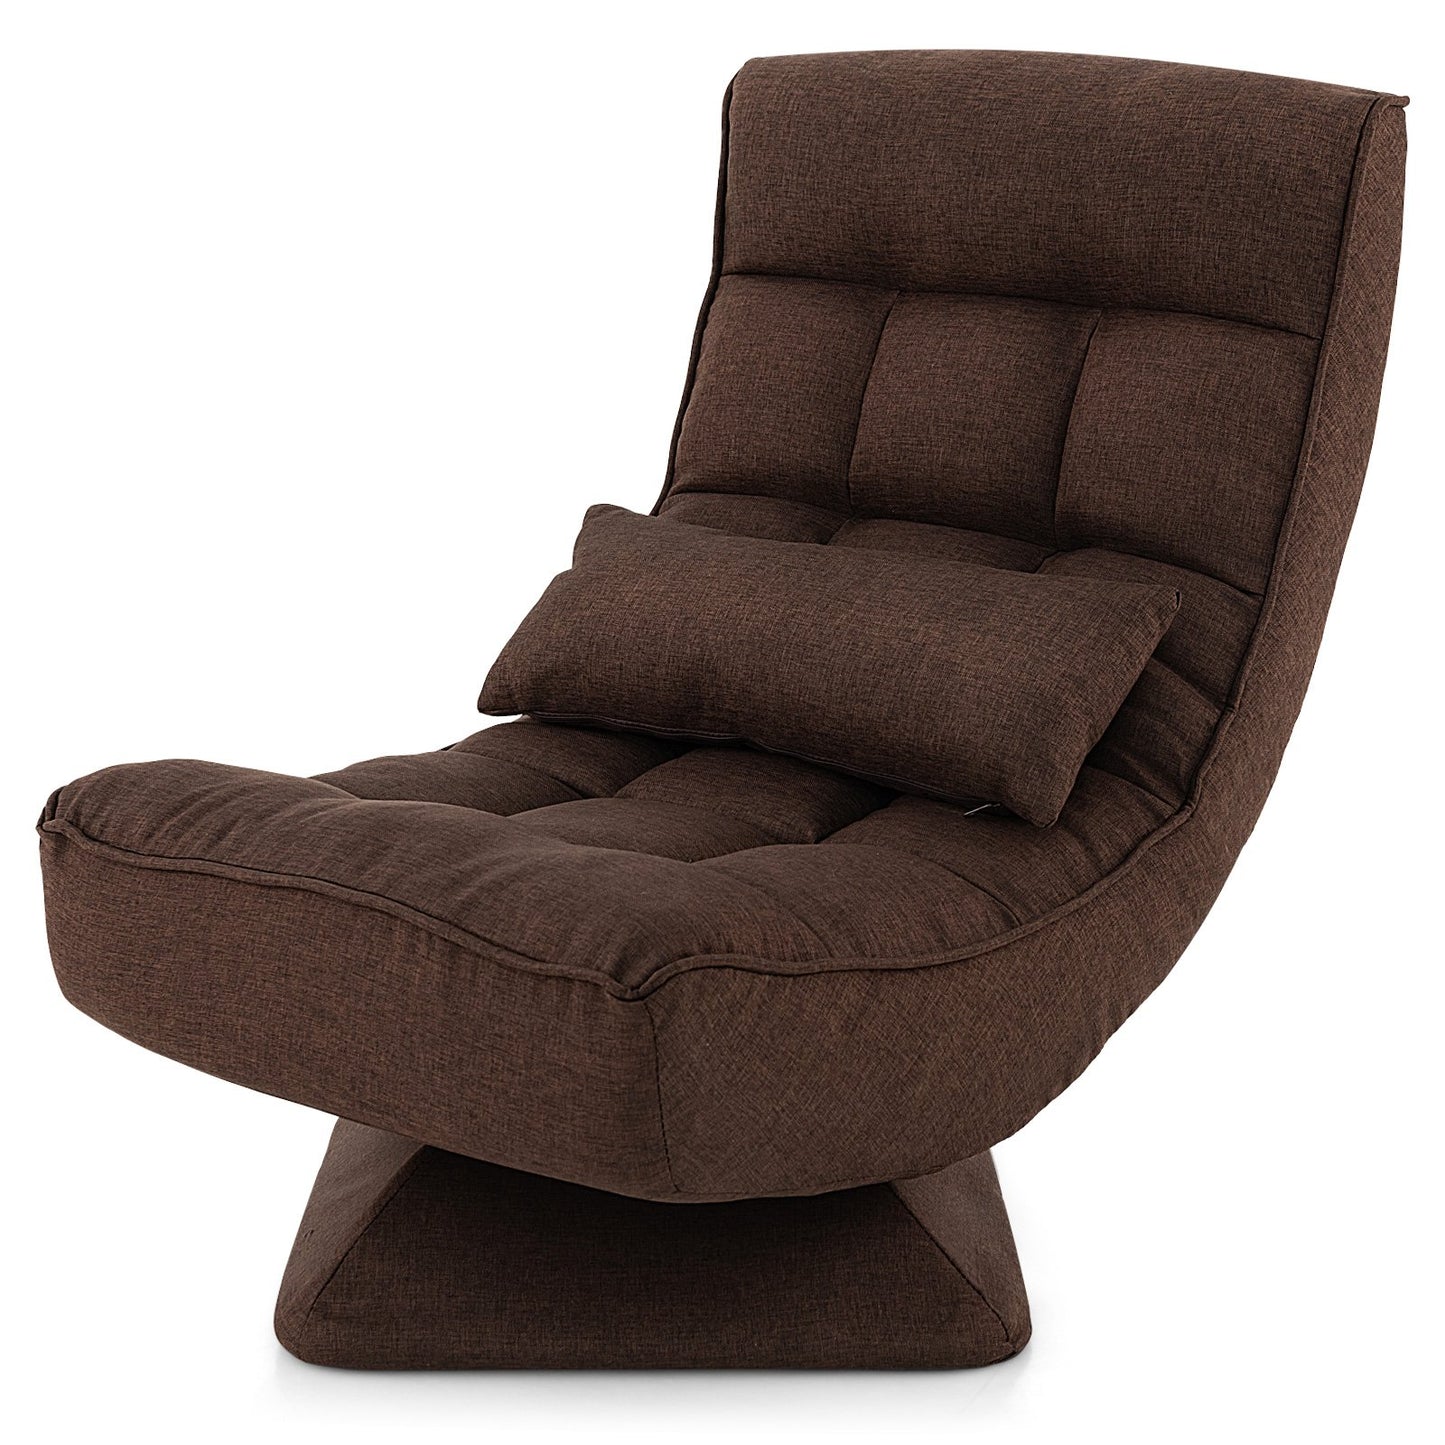 5-Level Adjustable 360° Swivel Floor Chair with Massage Pillow, Brown